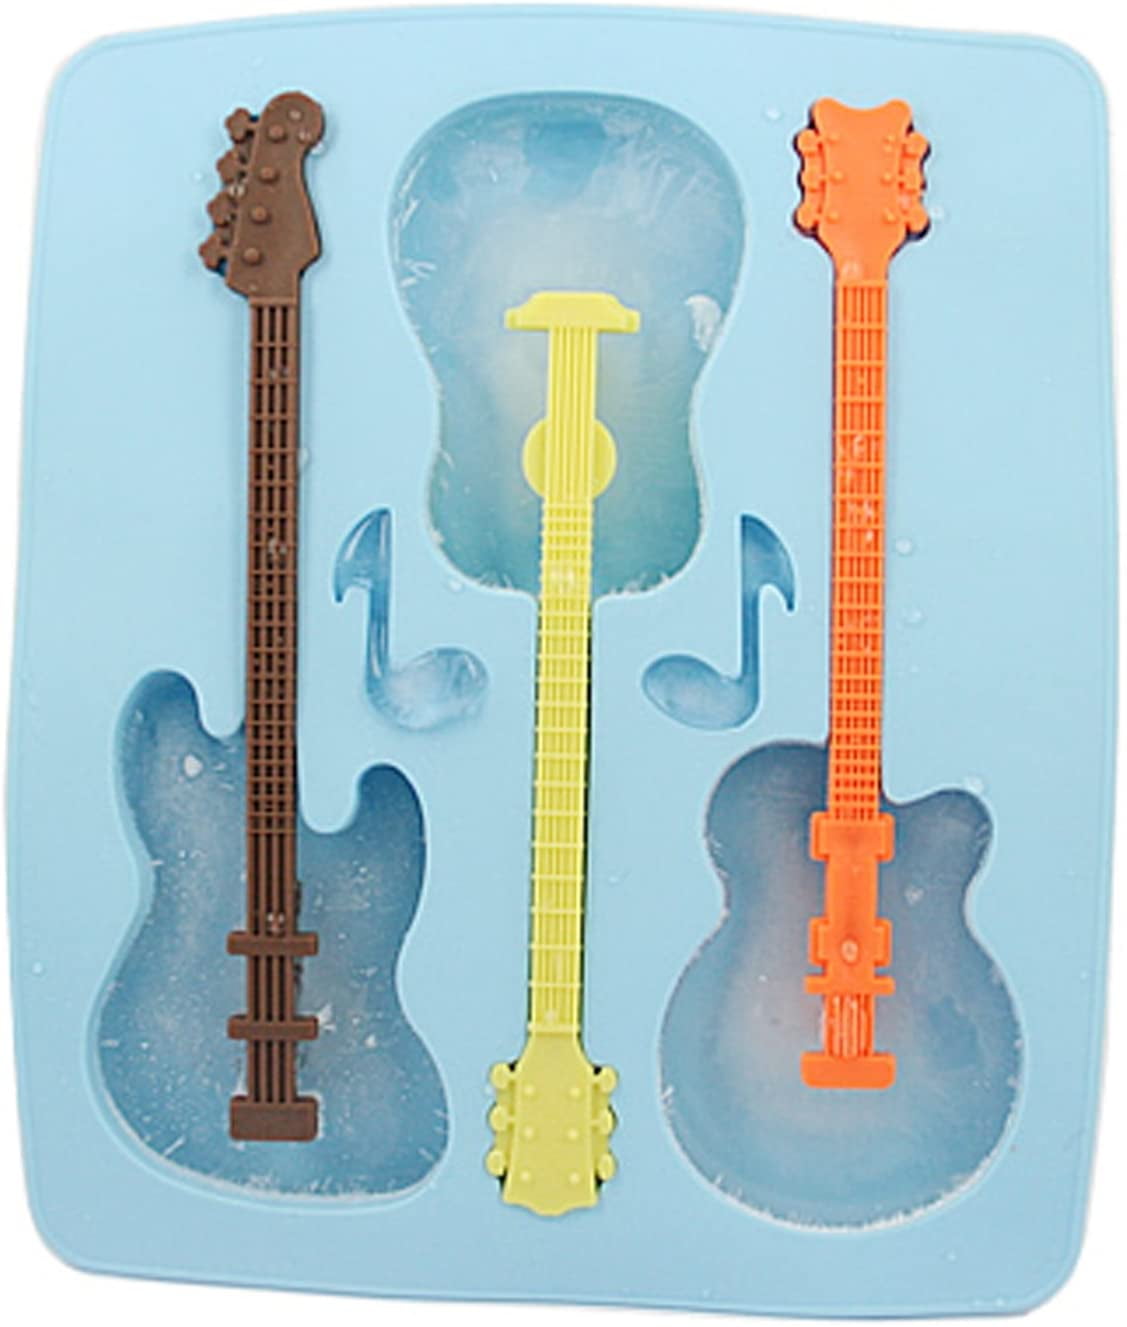 SILICONE GUITAR ICE CUBE TRAY Novelty Flexible Mould/Mold Music Mens/Ladies Gift 